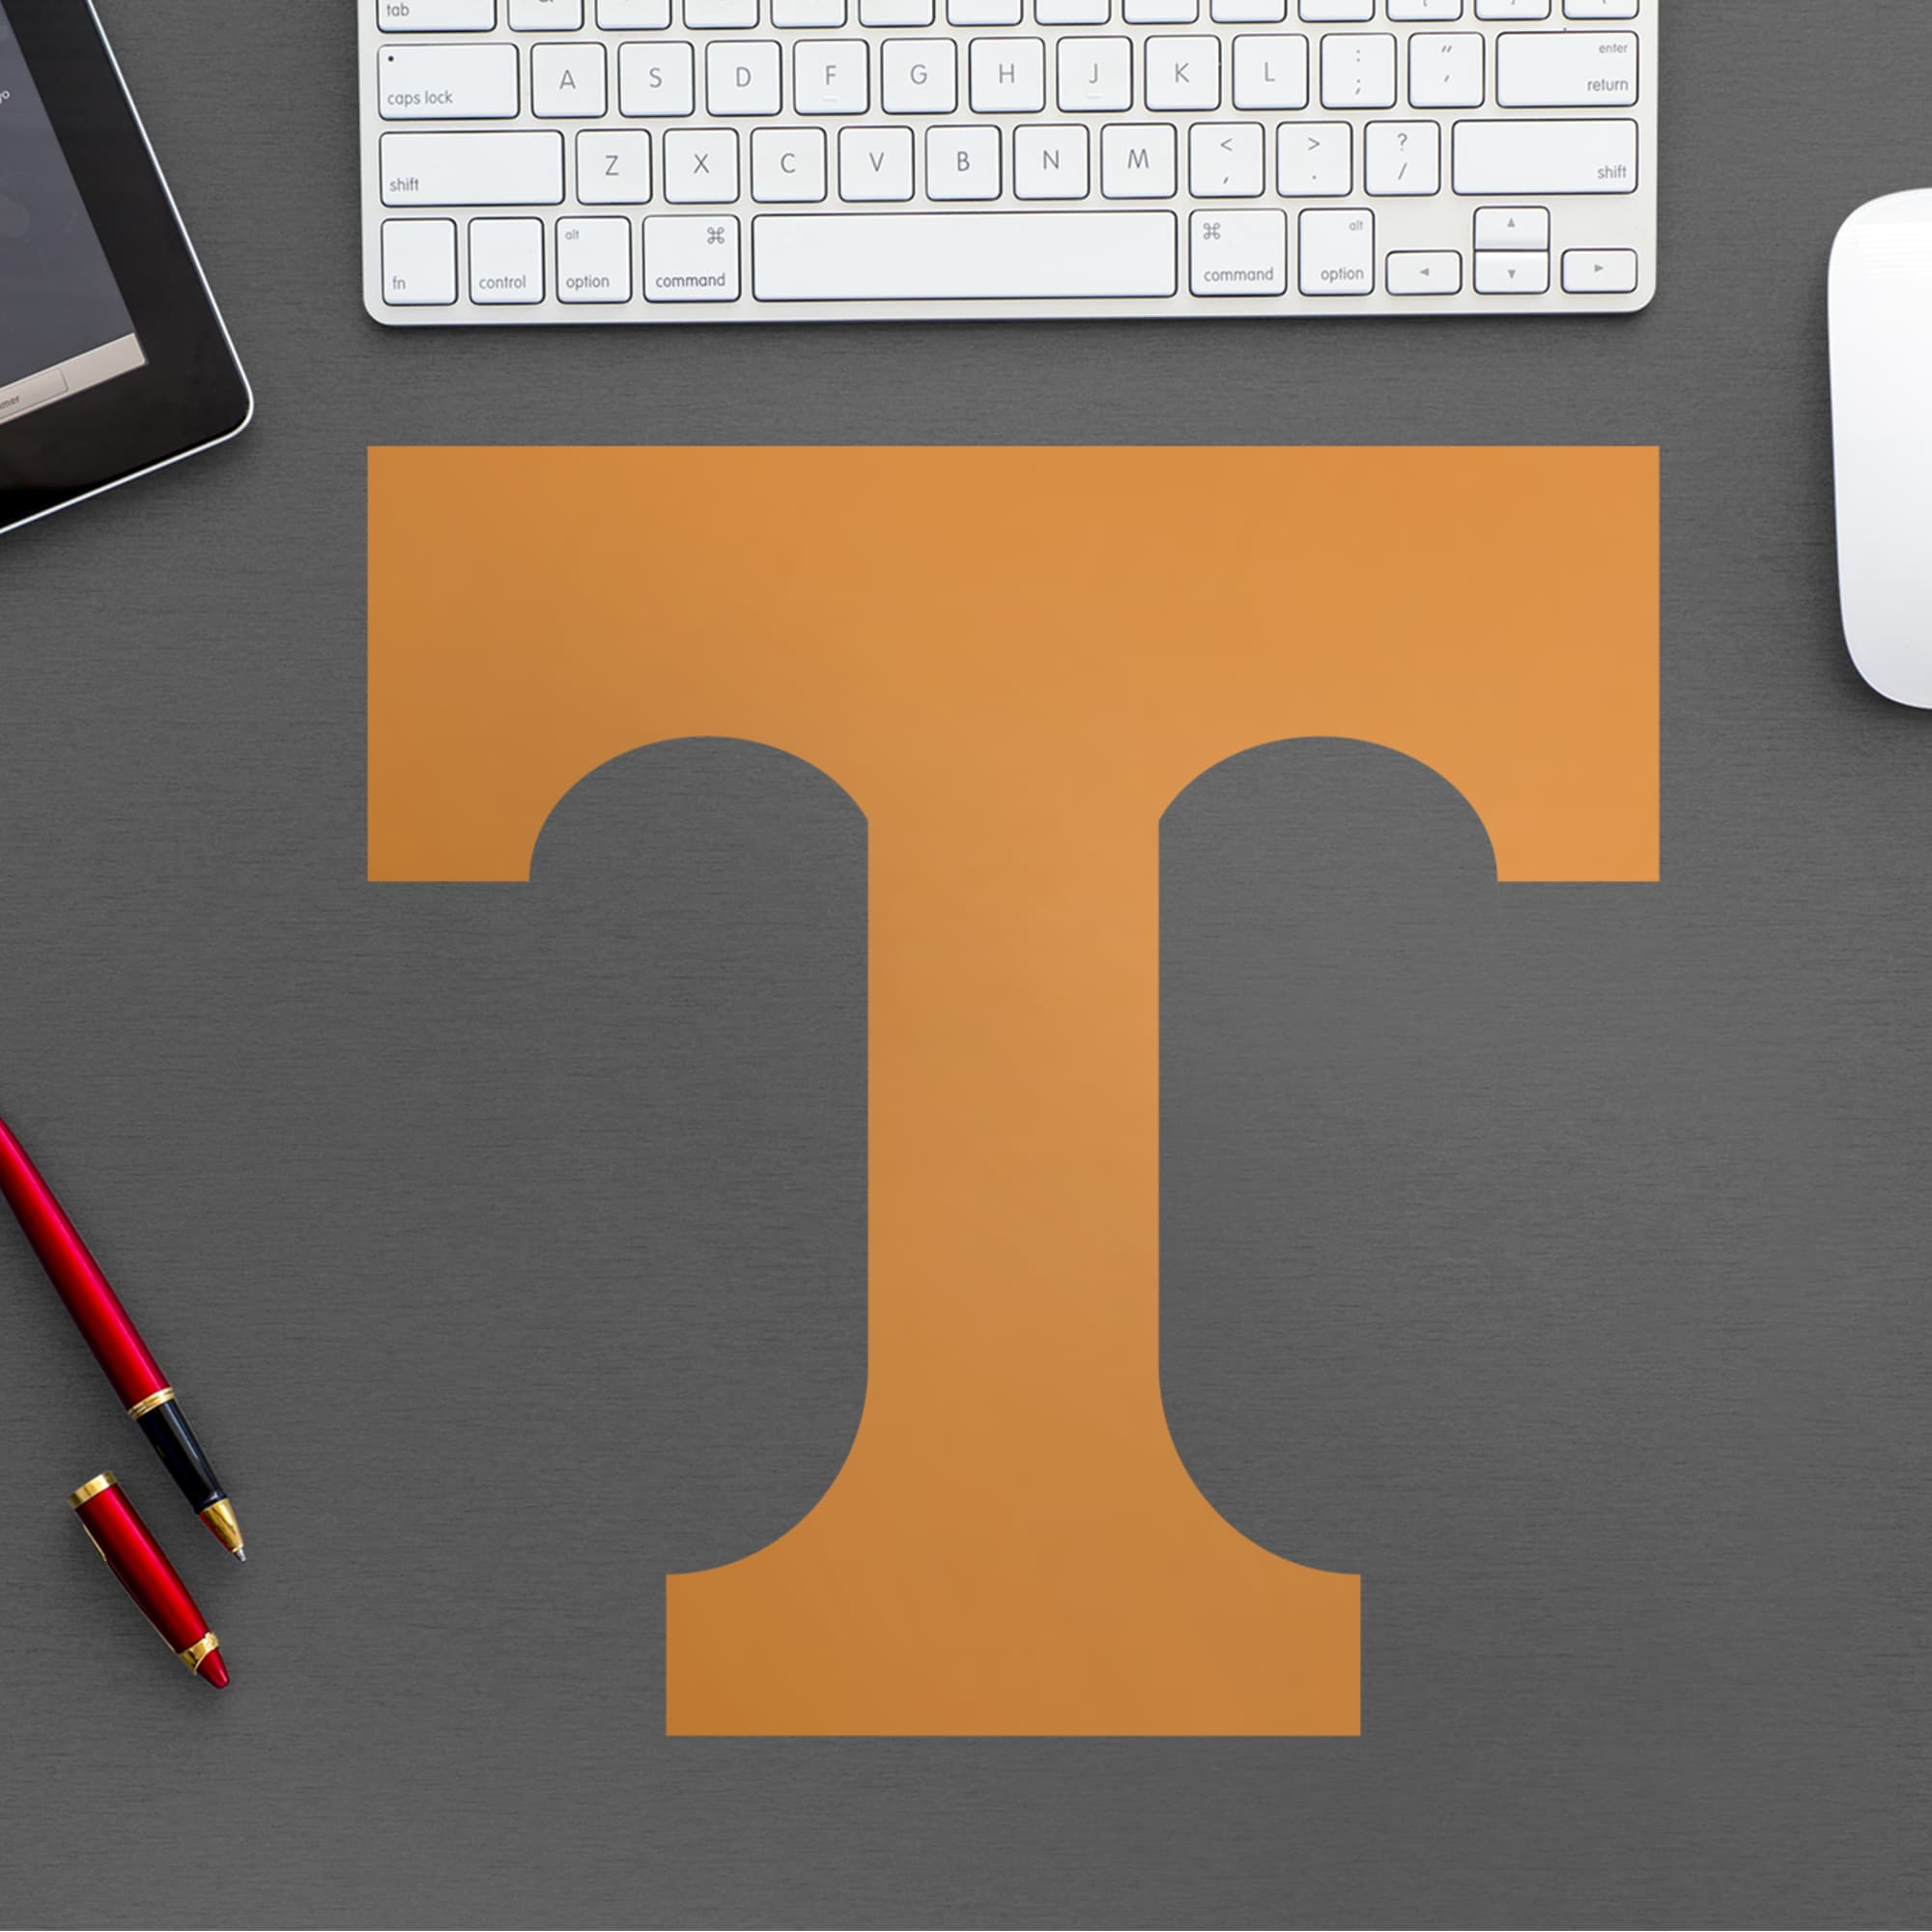 Tennessee Volunteers: Logo - Officially Licensed Removable Wall Decal 11.5"W x 10.0"H by Fathead | Vinyl